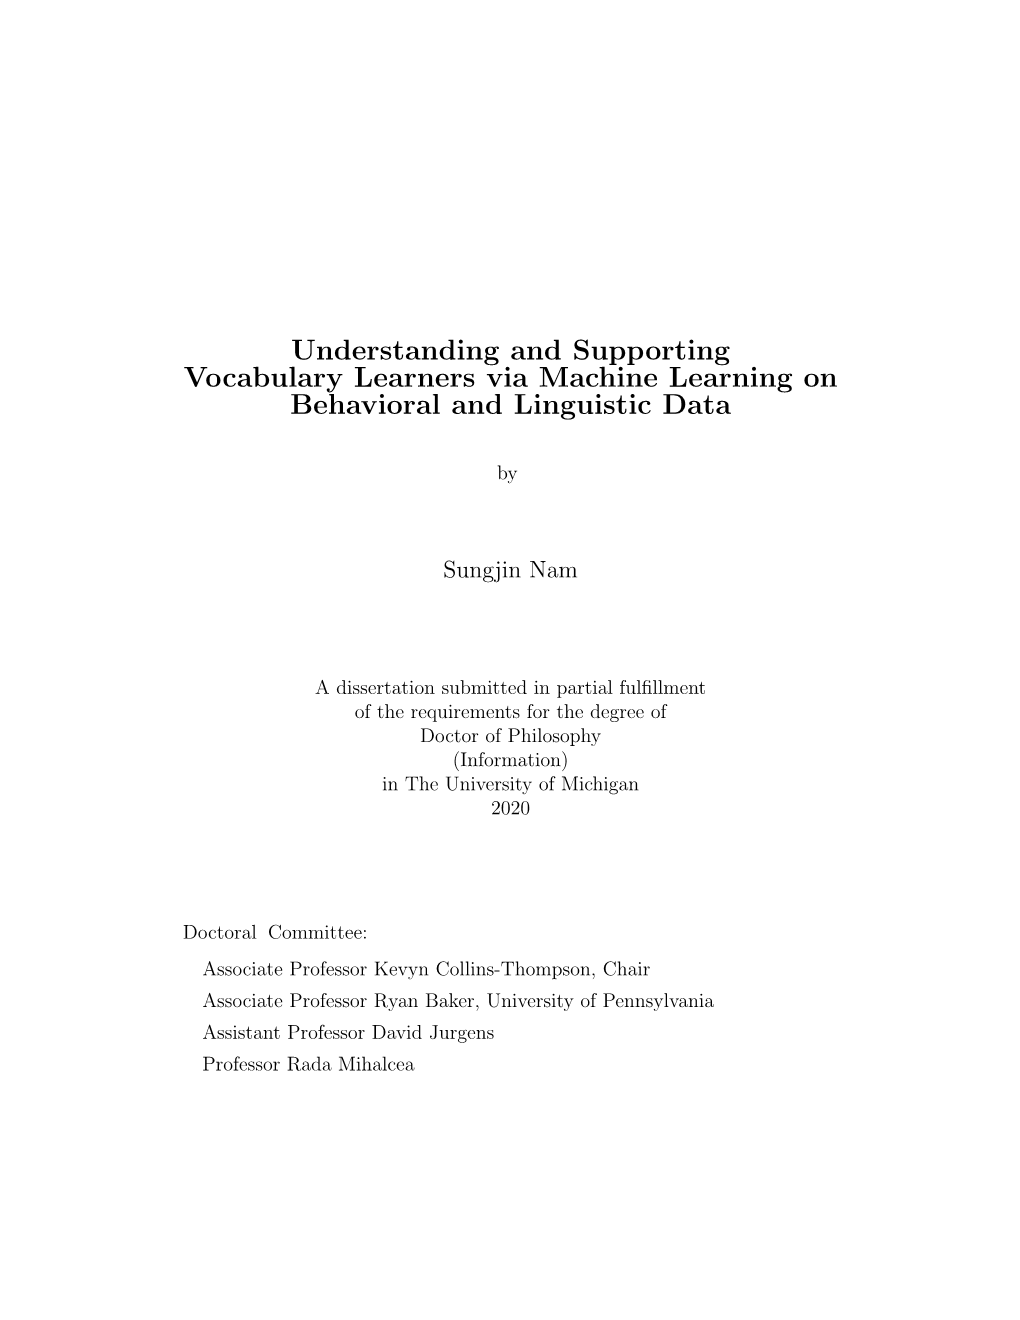 Understanding and Supporting Vocabulary Learners Via Machine Learning on Behavioral and Linguistic Data